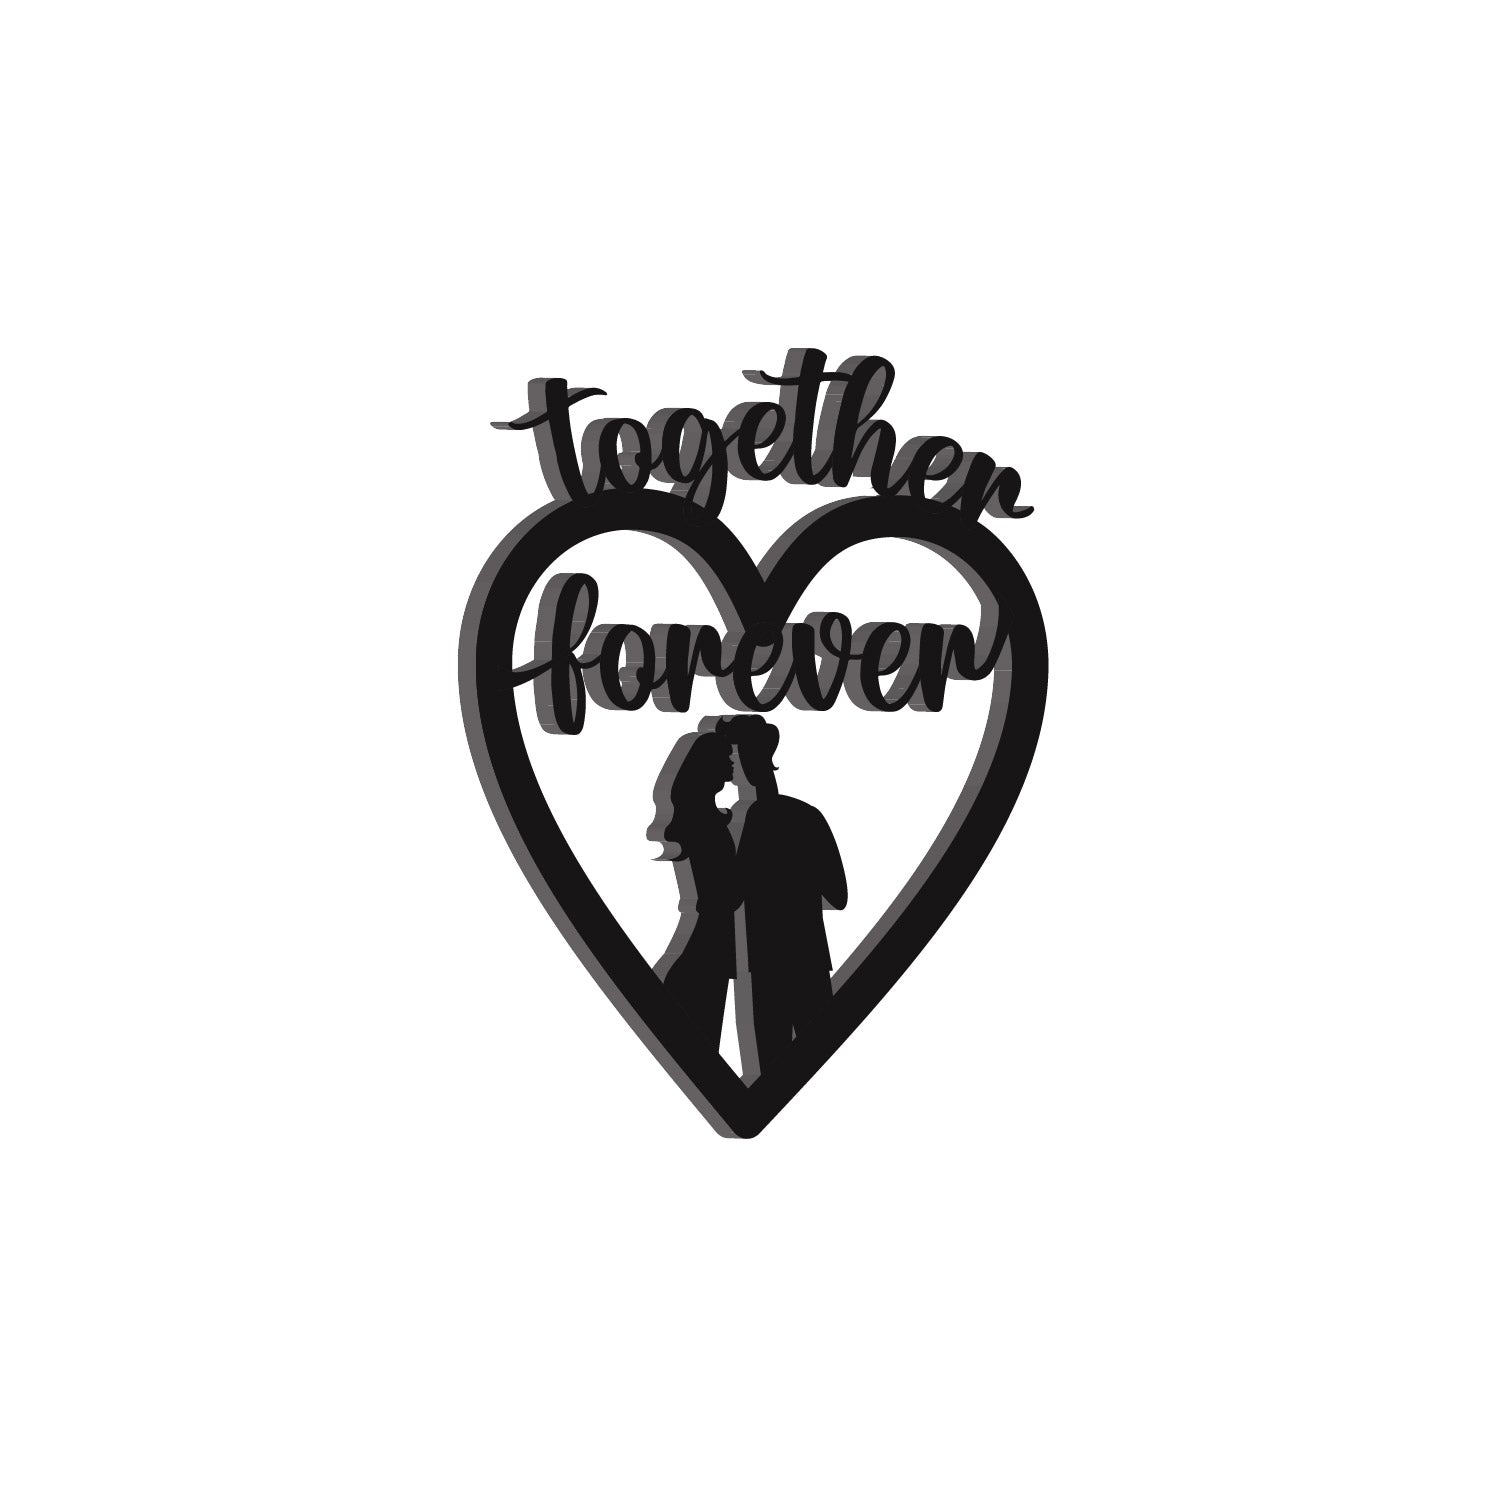 "Together Forever" Love Theme Black Engineered Wood Wall Art Cutout, Ready to Hang Home Decor 4